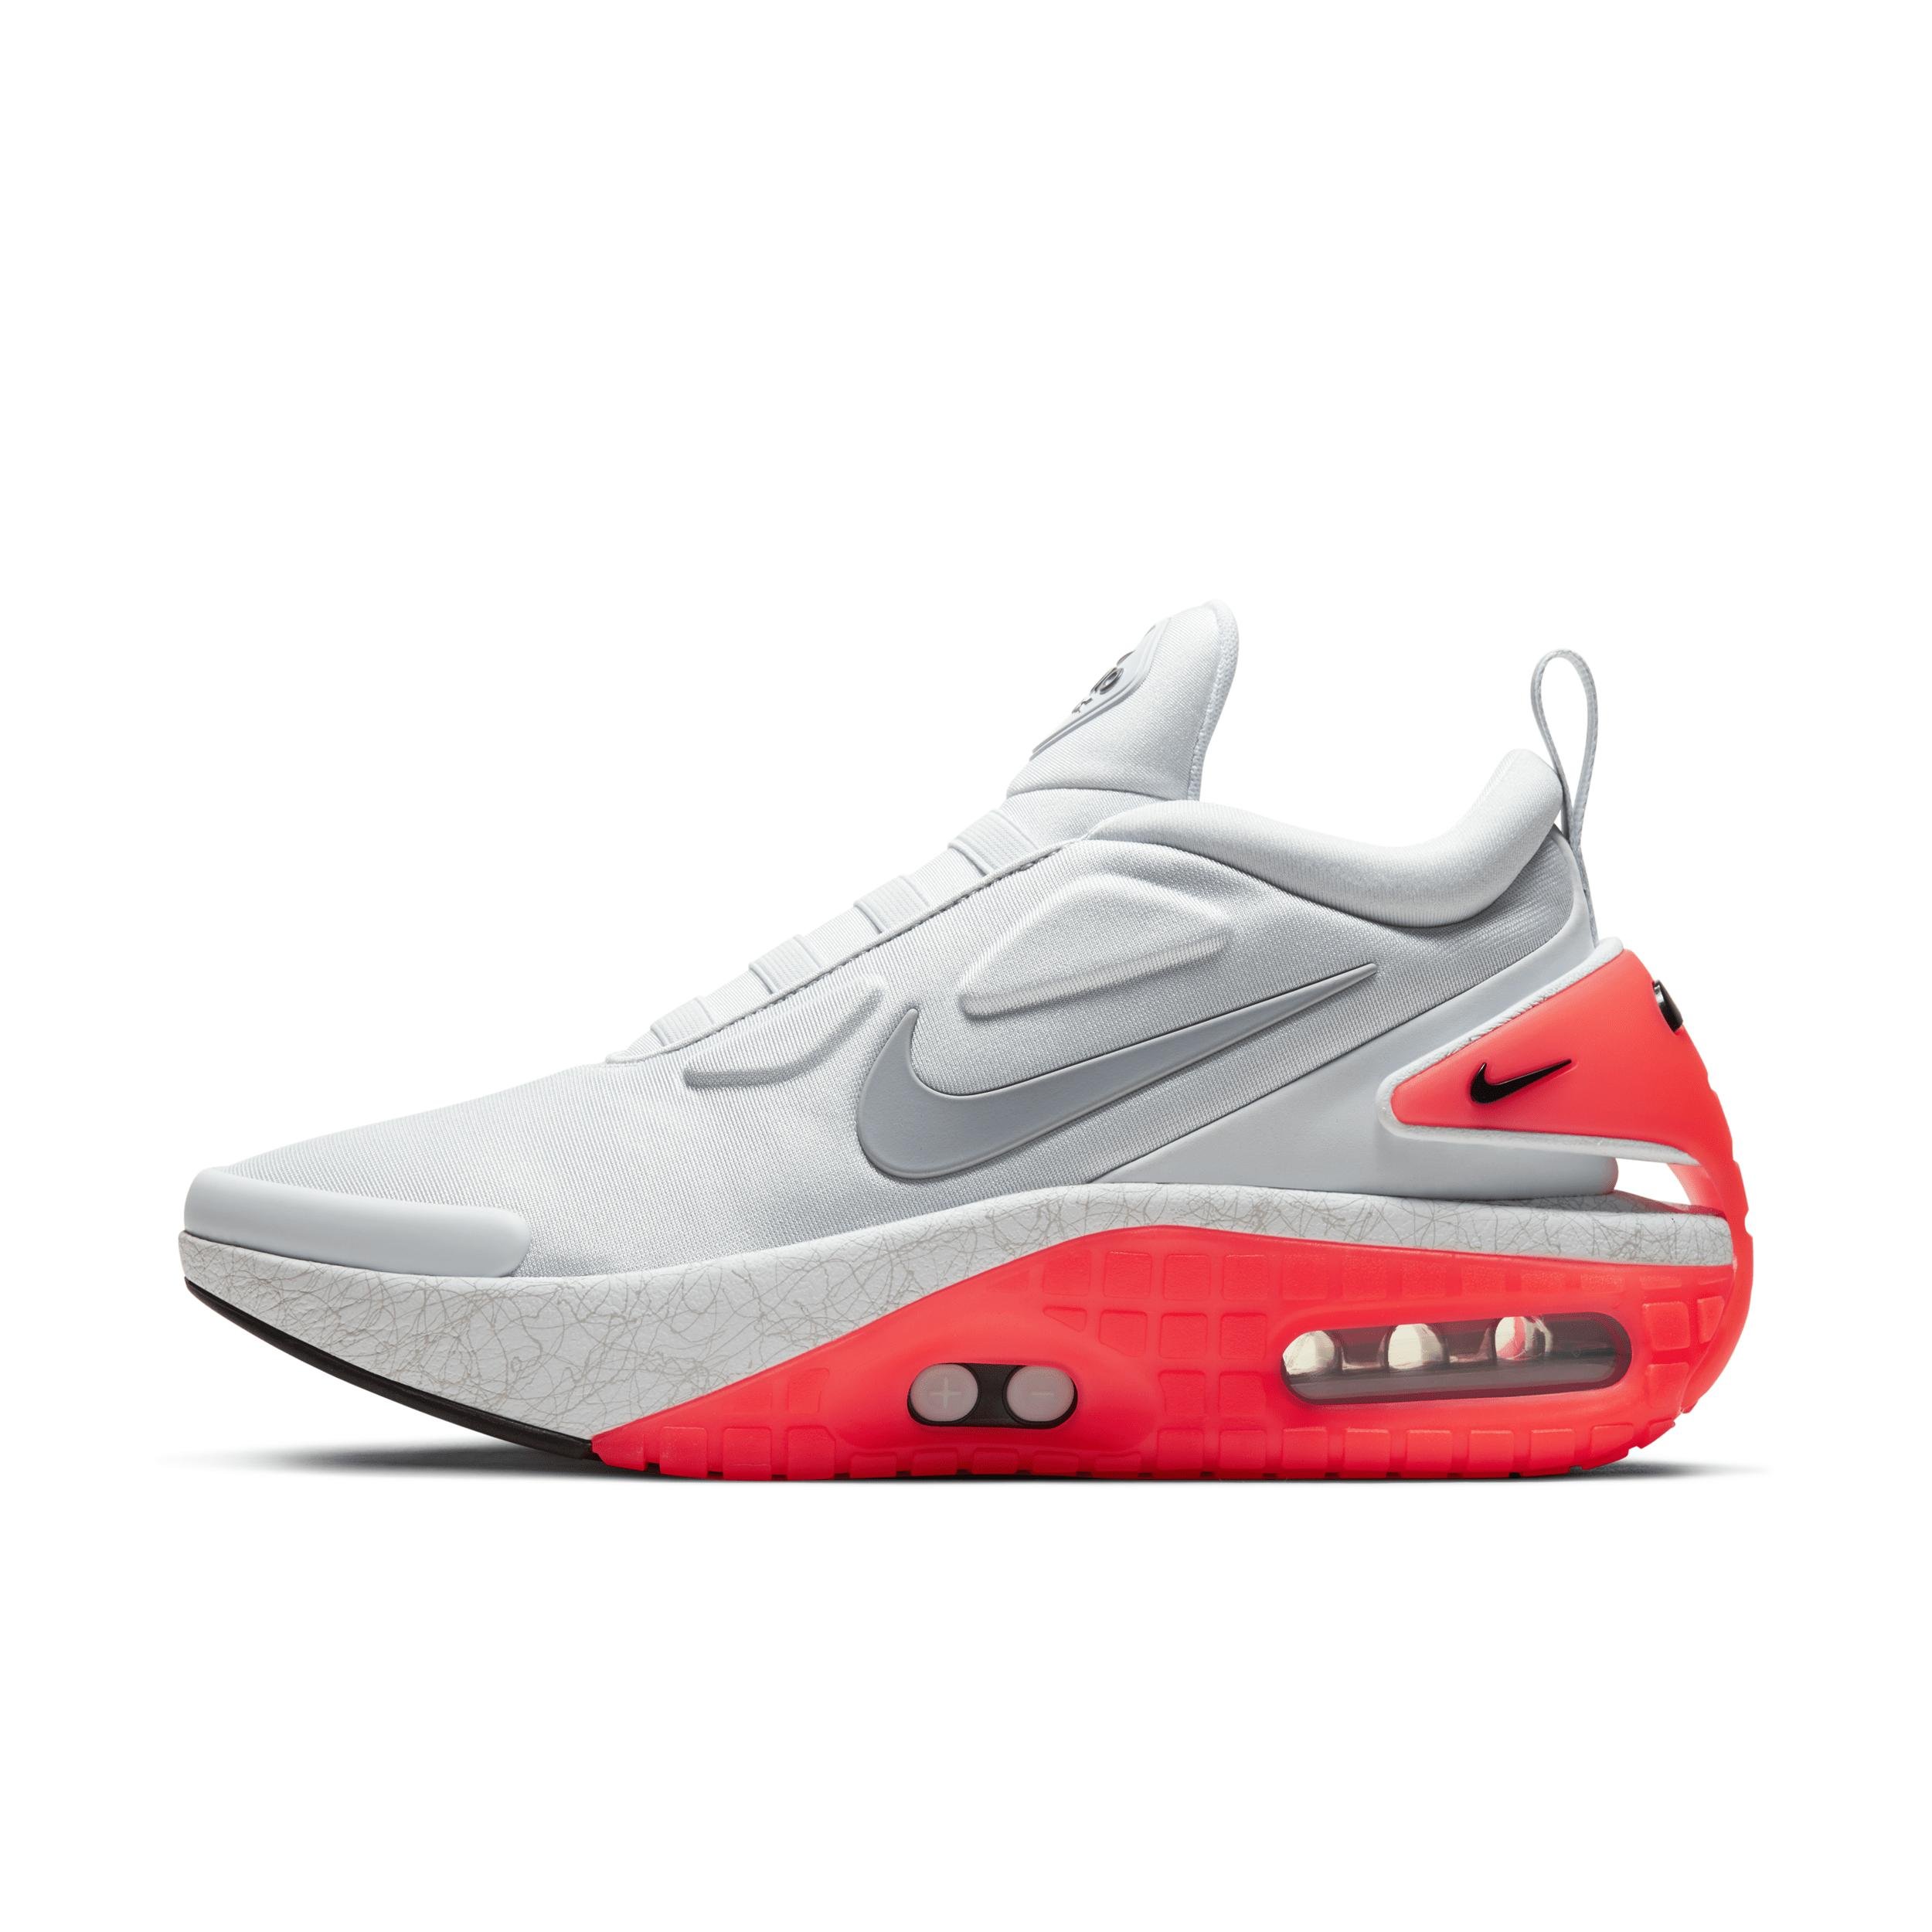 Nike Men's Adapt Auto Max Shoes by NIKE